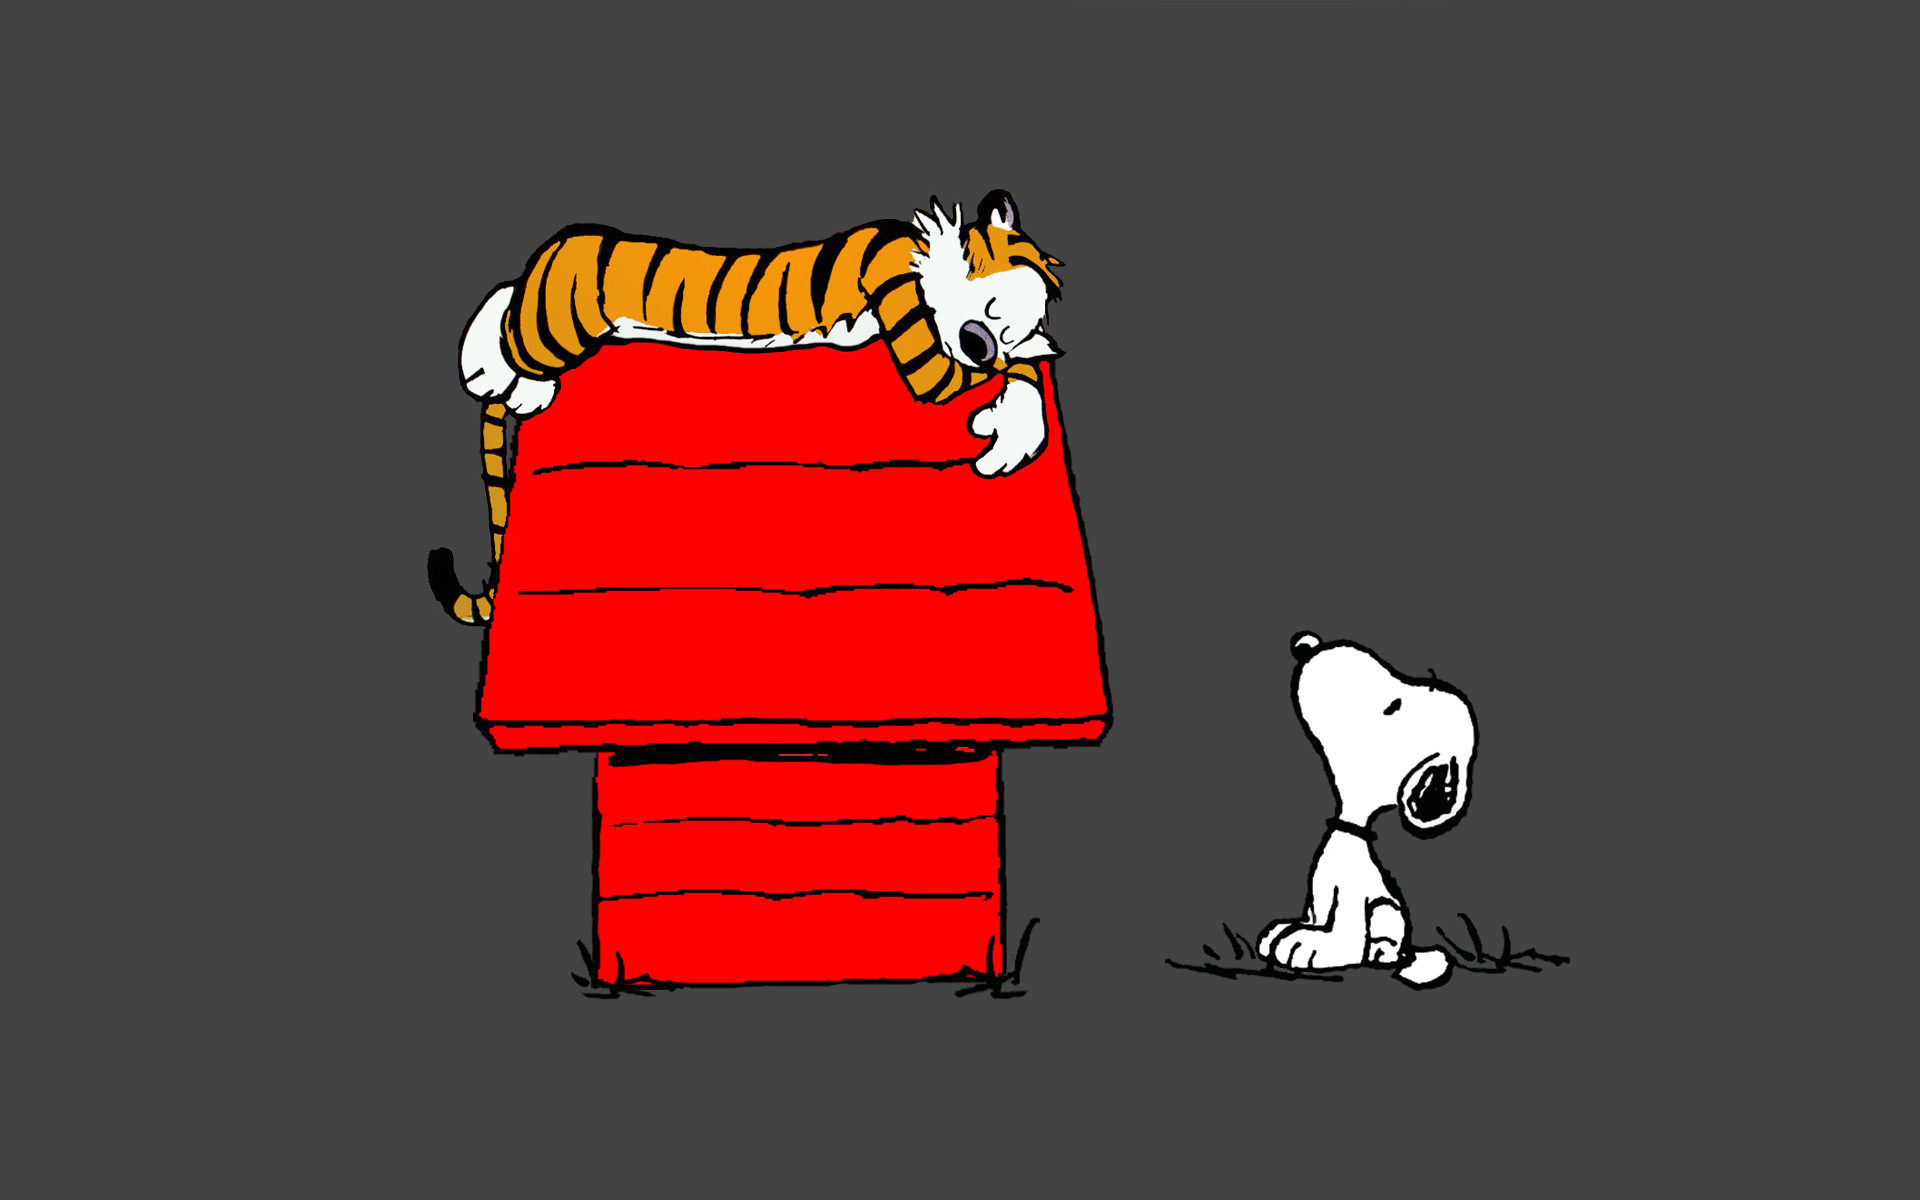 Free Download Calvin And Hobbes Snoopy Sleep Peanuts Tiger Wallpaper 19x10 19x10 For Your Desktop Mobile Tablet Explore 50 Reddit Calvin And Hobbes Wallpaper Calvin And Hobbes Hd Wallpaper